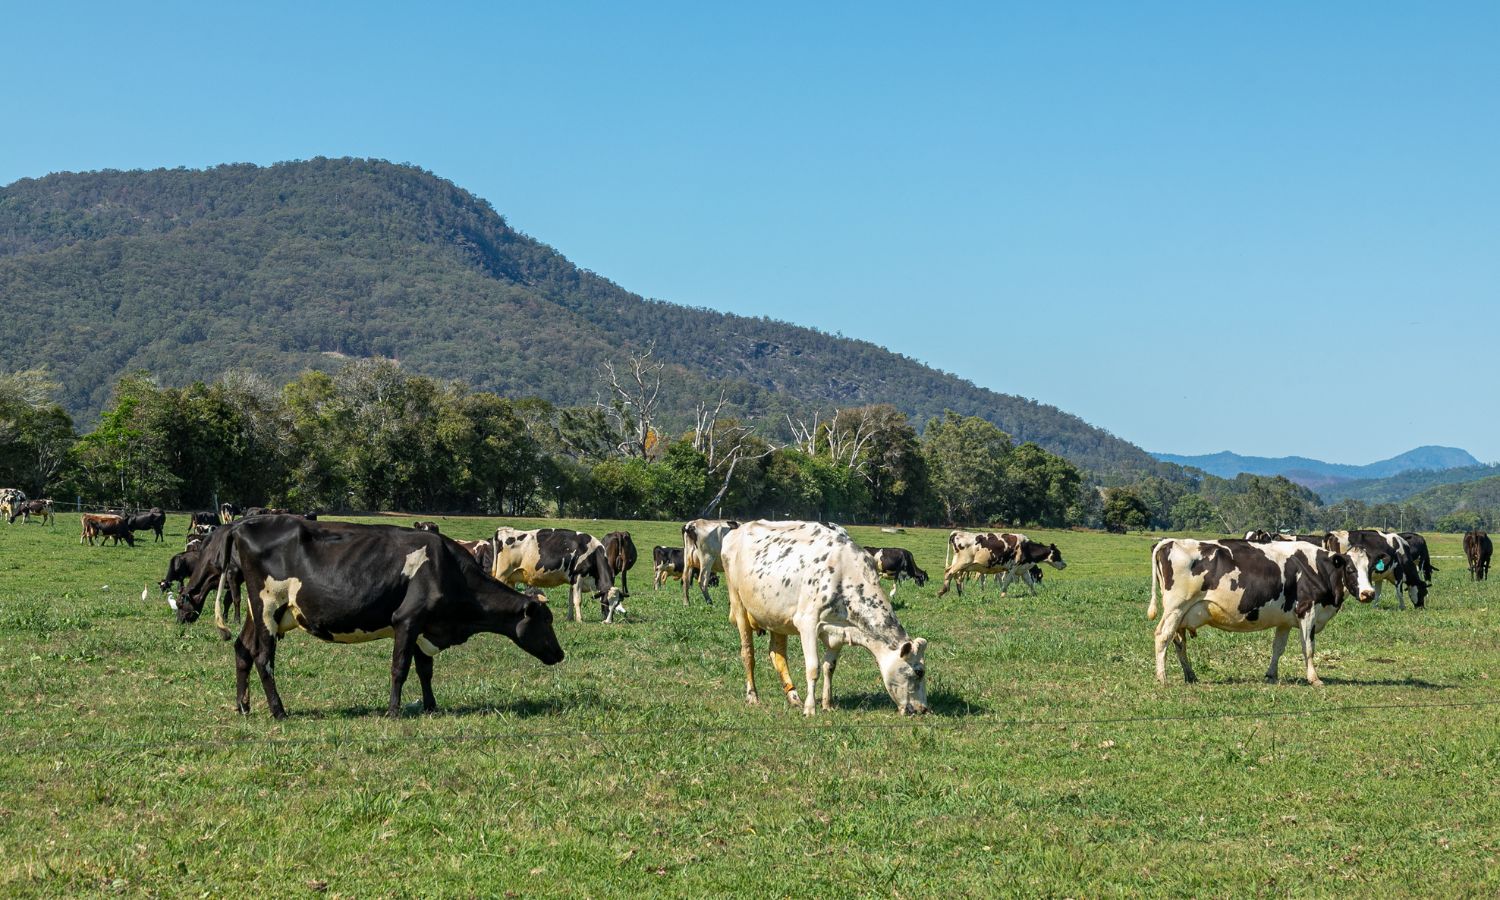 Image showing dairy cows in australia to represent EU Australia free trade talks over cheese